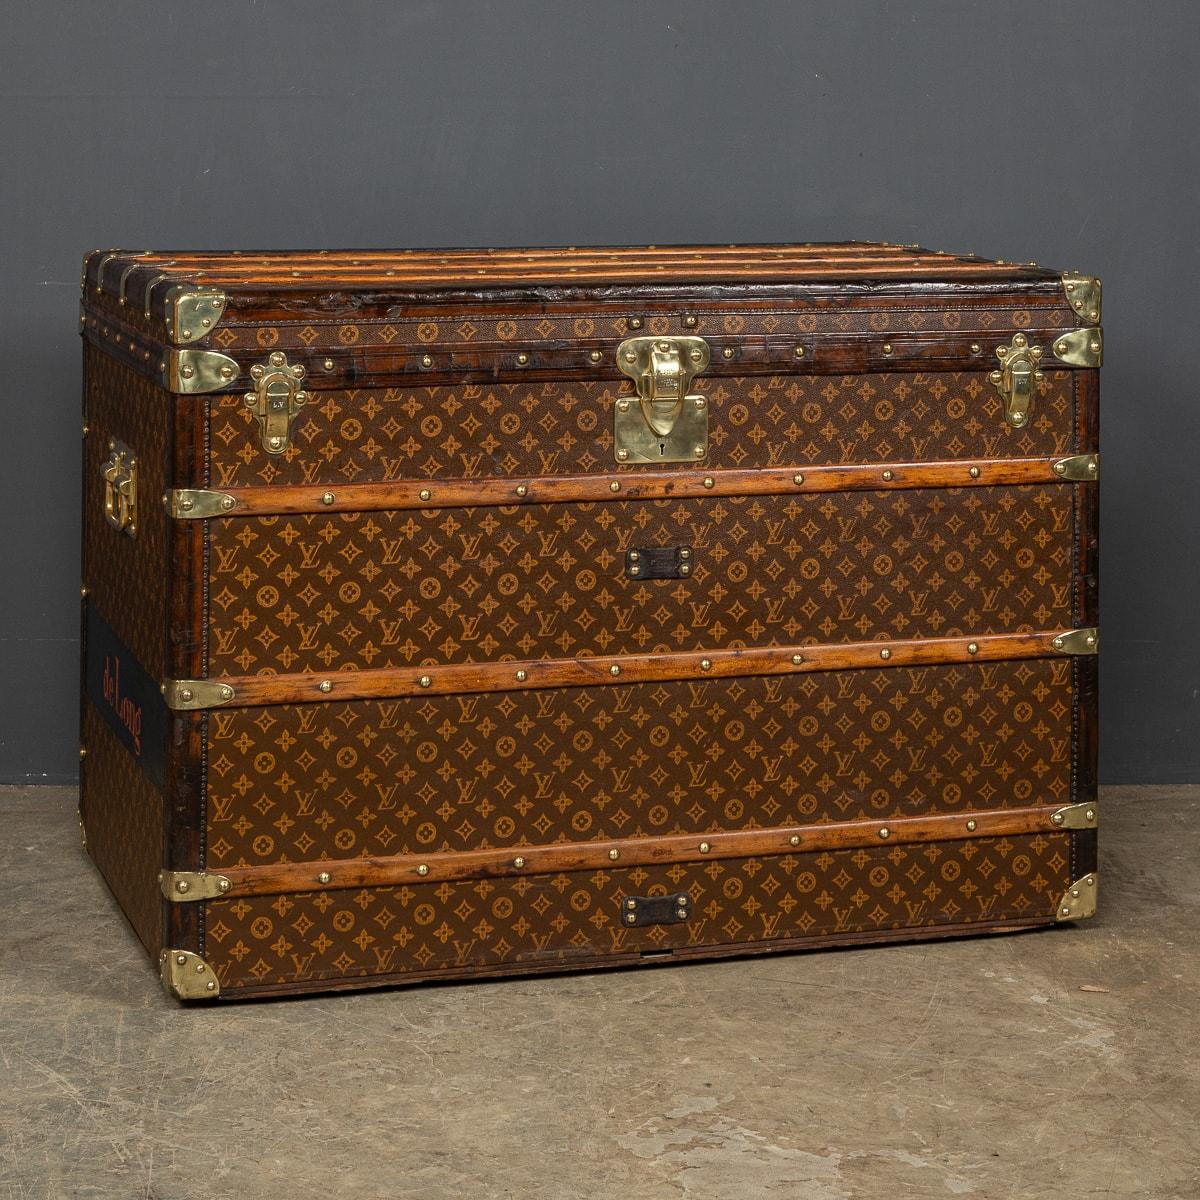 This example is a Louis Vuitton trunk that dates to around 1930. It is covered in the world famous LV monogrammed canvas, with its leather borders and brass fittings this trunk would have been the top of the line even at the time of purchase over